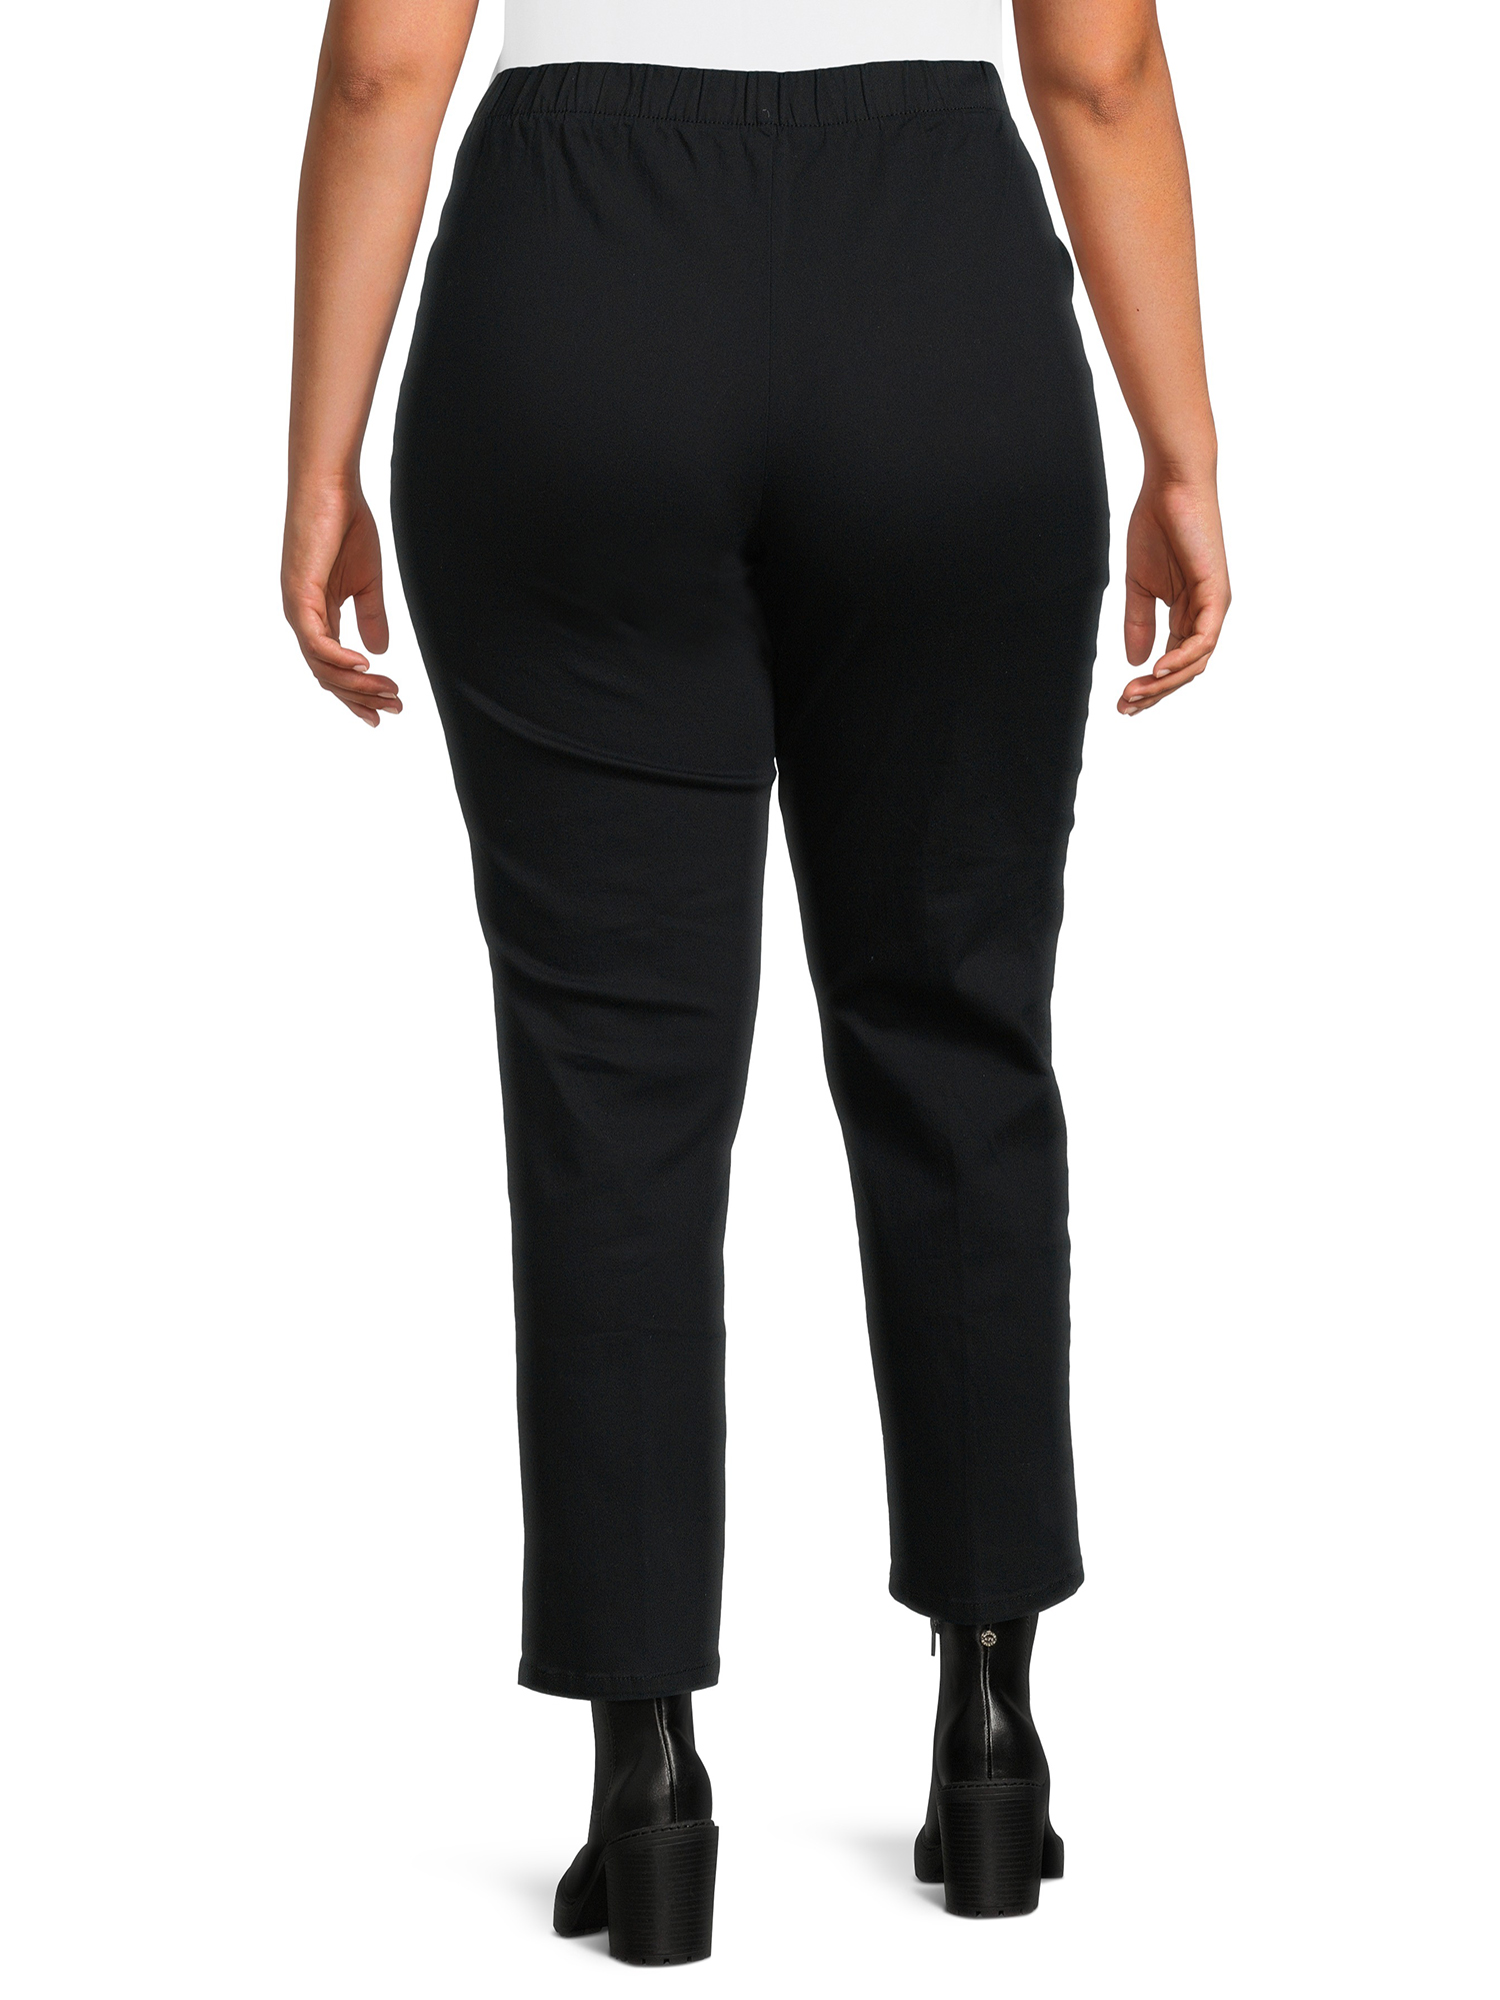 Just My Size Women's Plus 2 Pocket Pull-On Pant - image 3 of 6